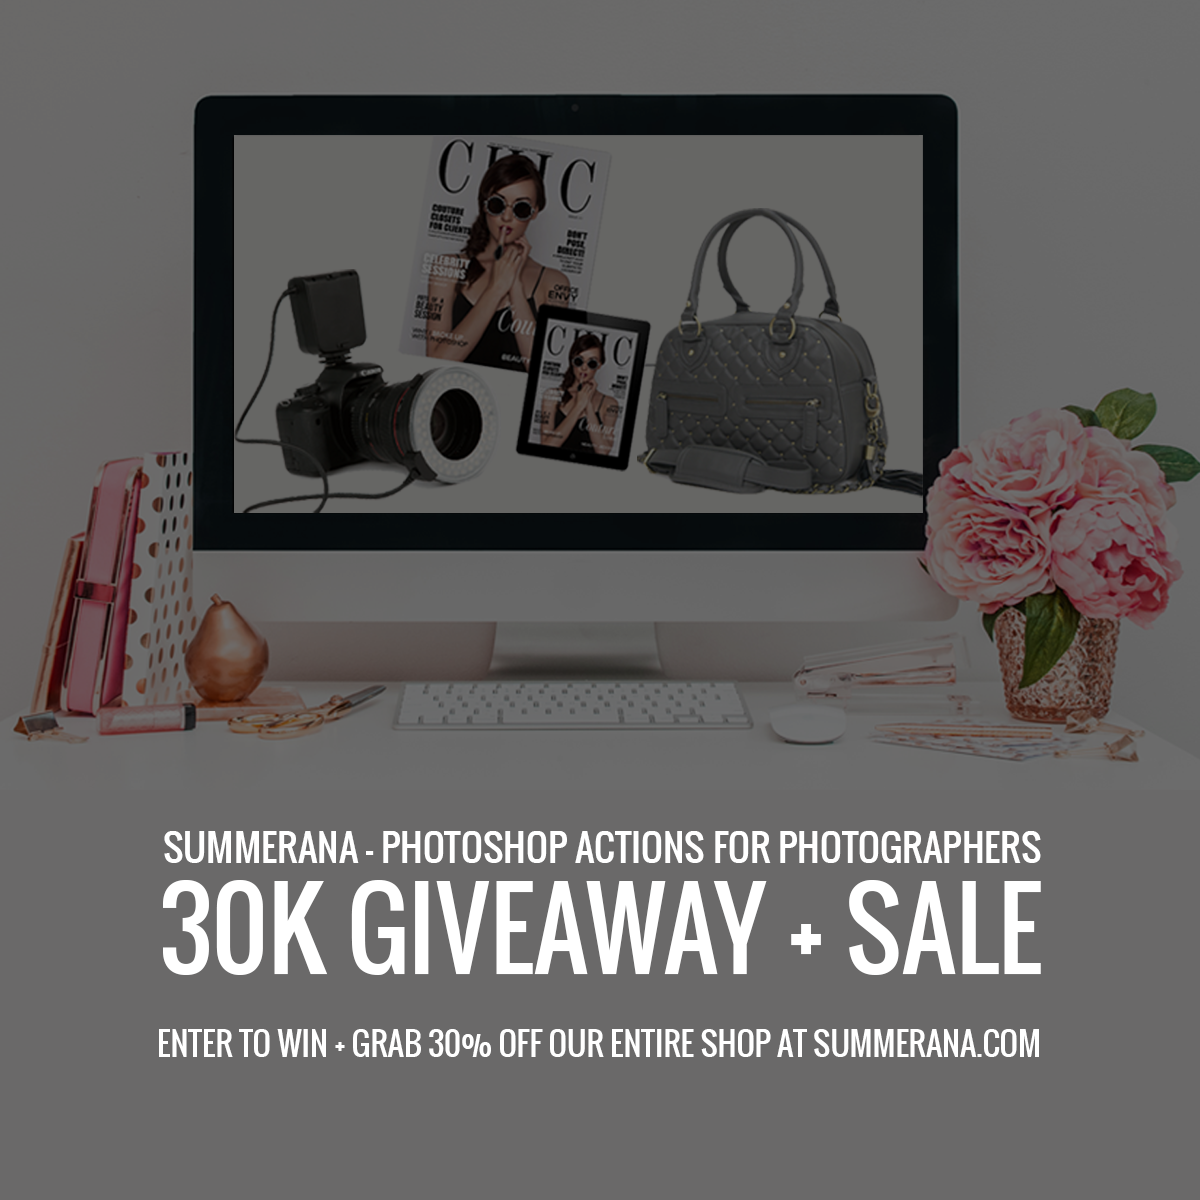 summerana-photoshop-actions-for-photographers-giveaway-30k